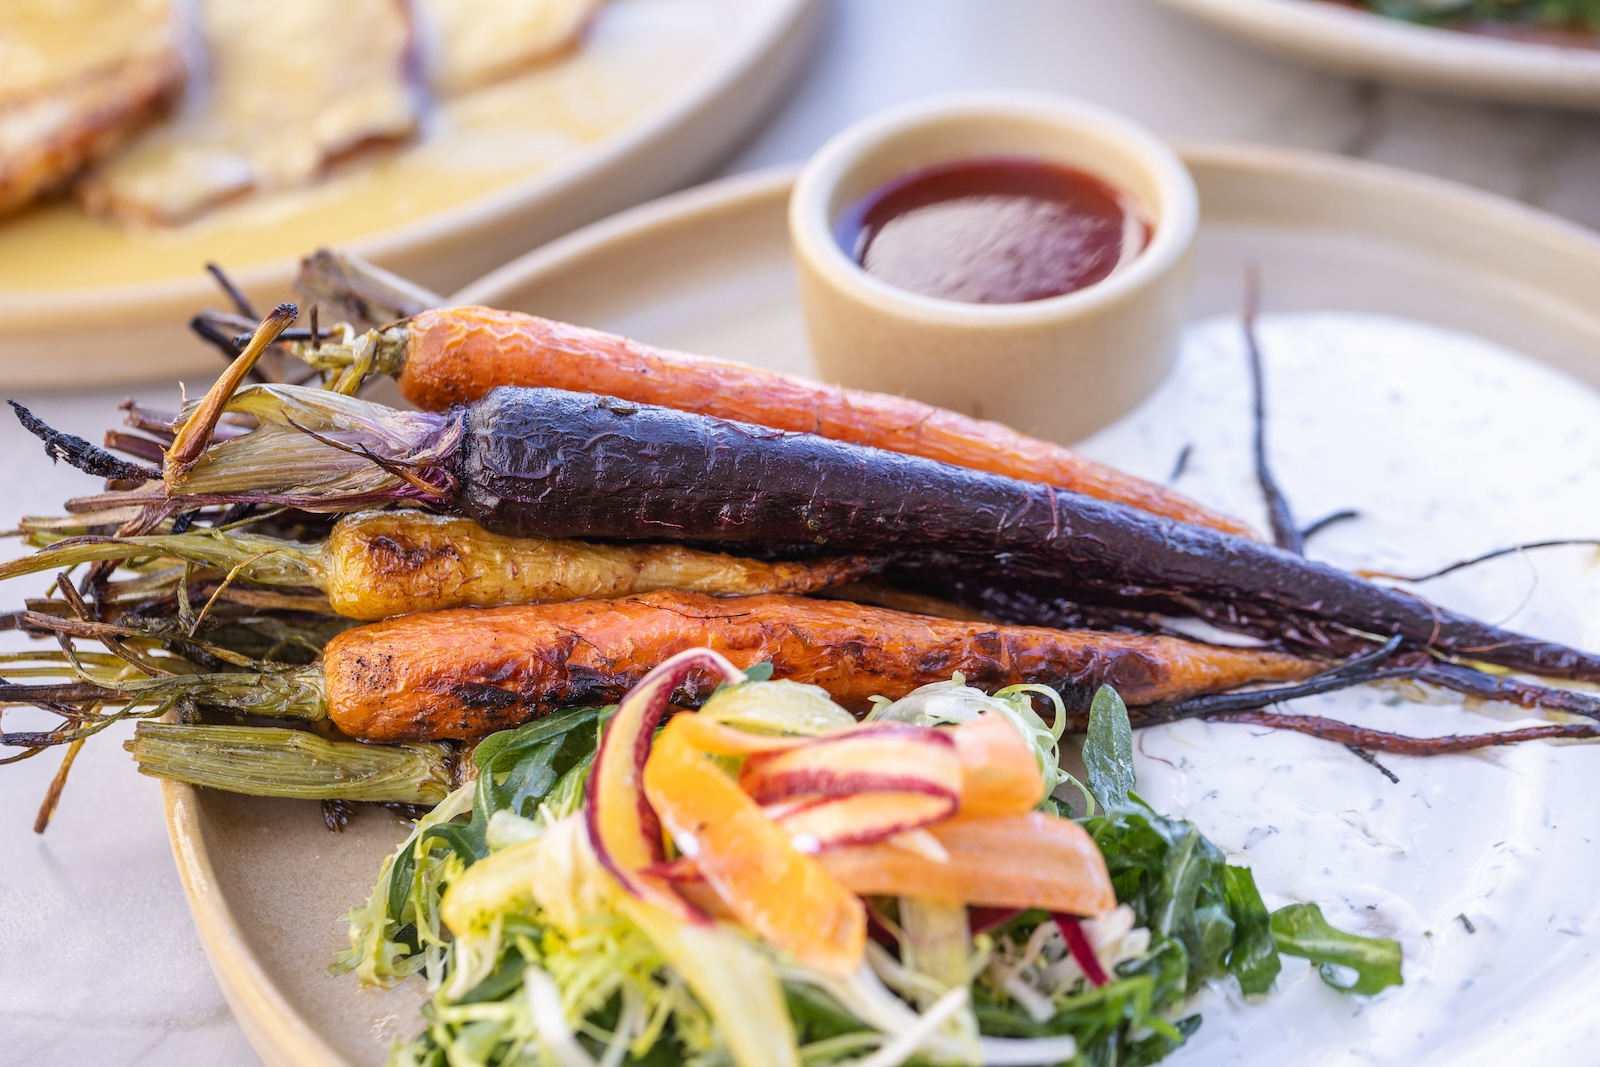 A plate of wood-fired carrots in multiple colors on a serving board.